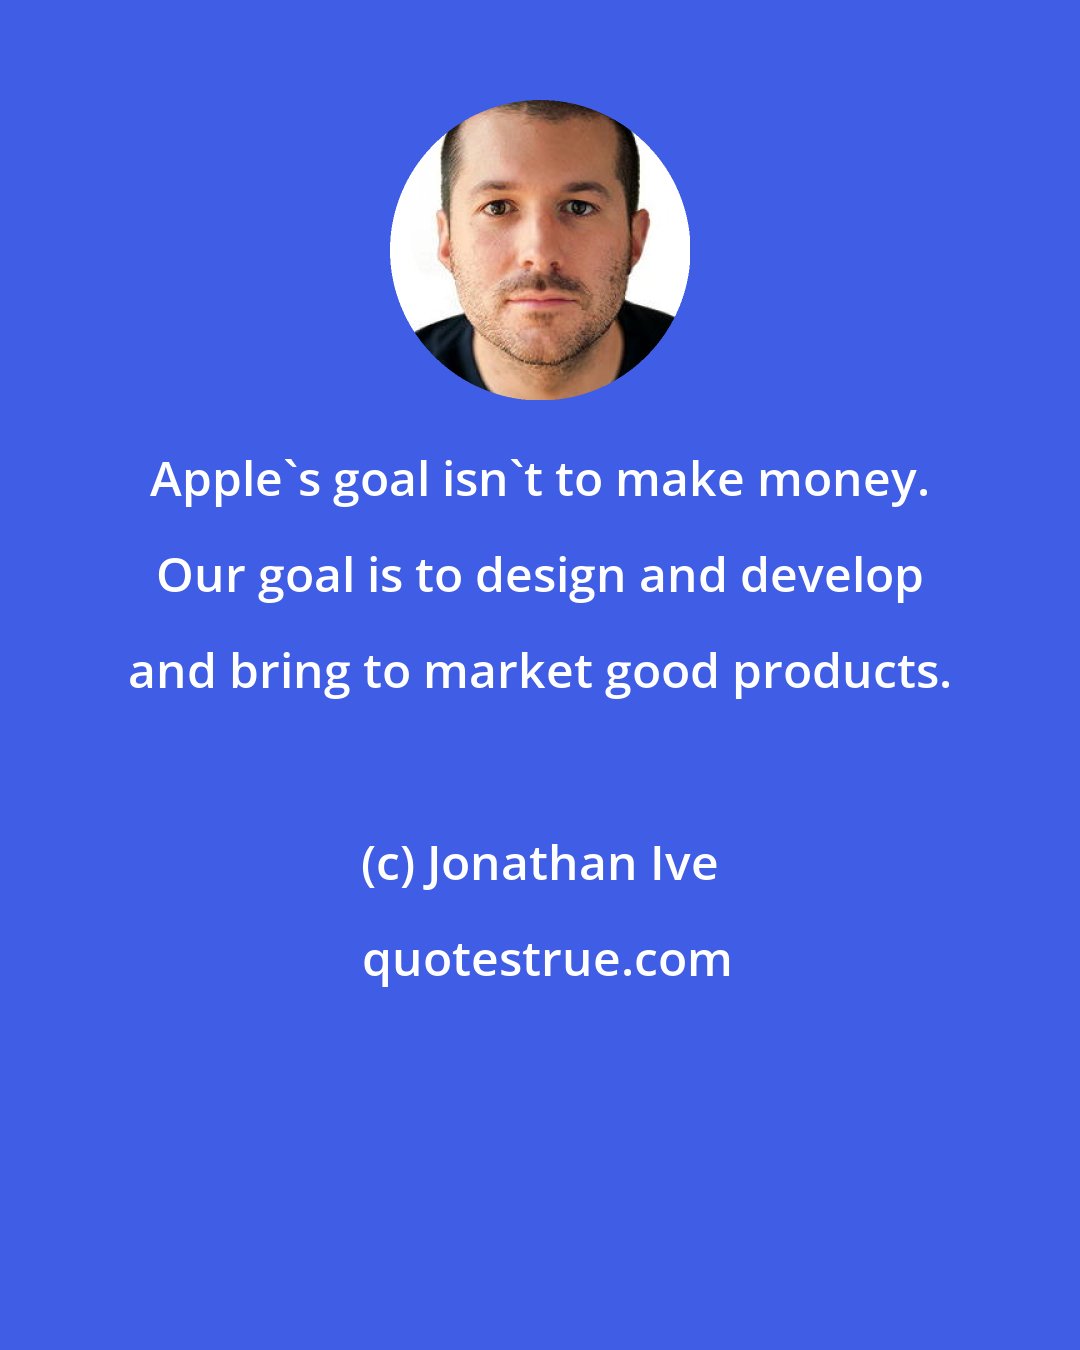 Jonathan Ive: Apple's goal isn't to make money. Our goal is to design and develop and bring to market good products.